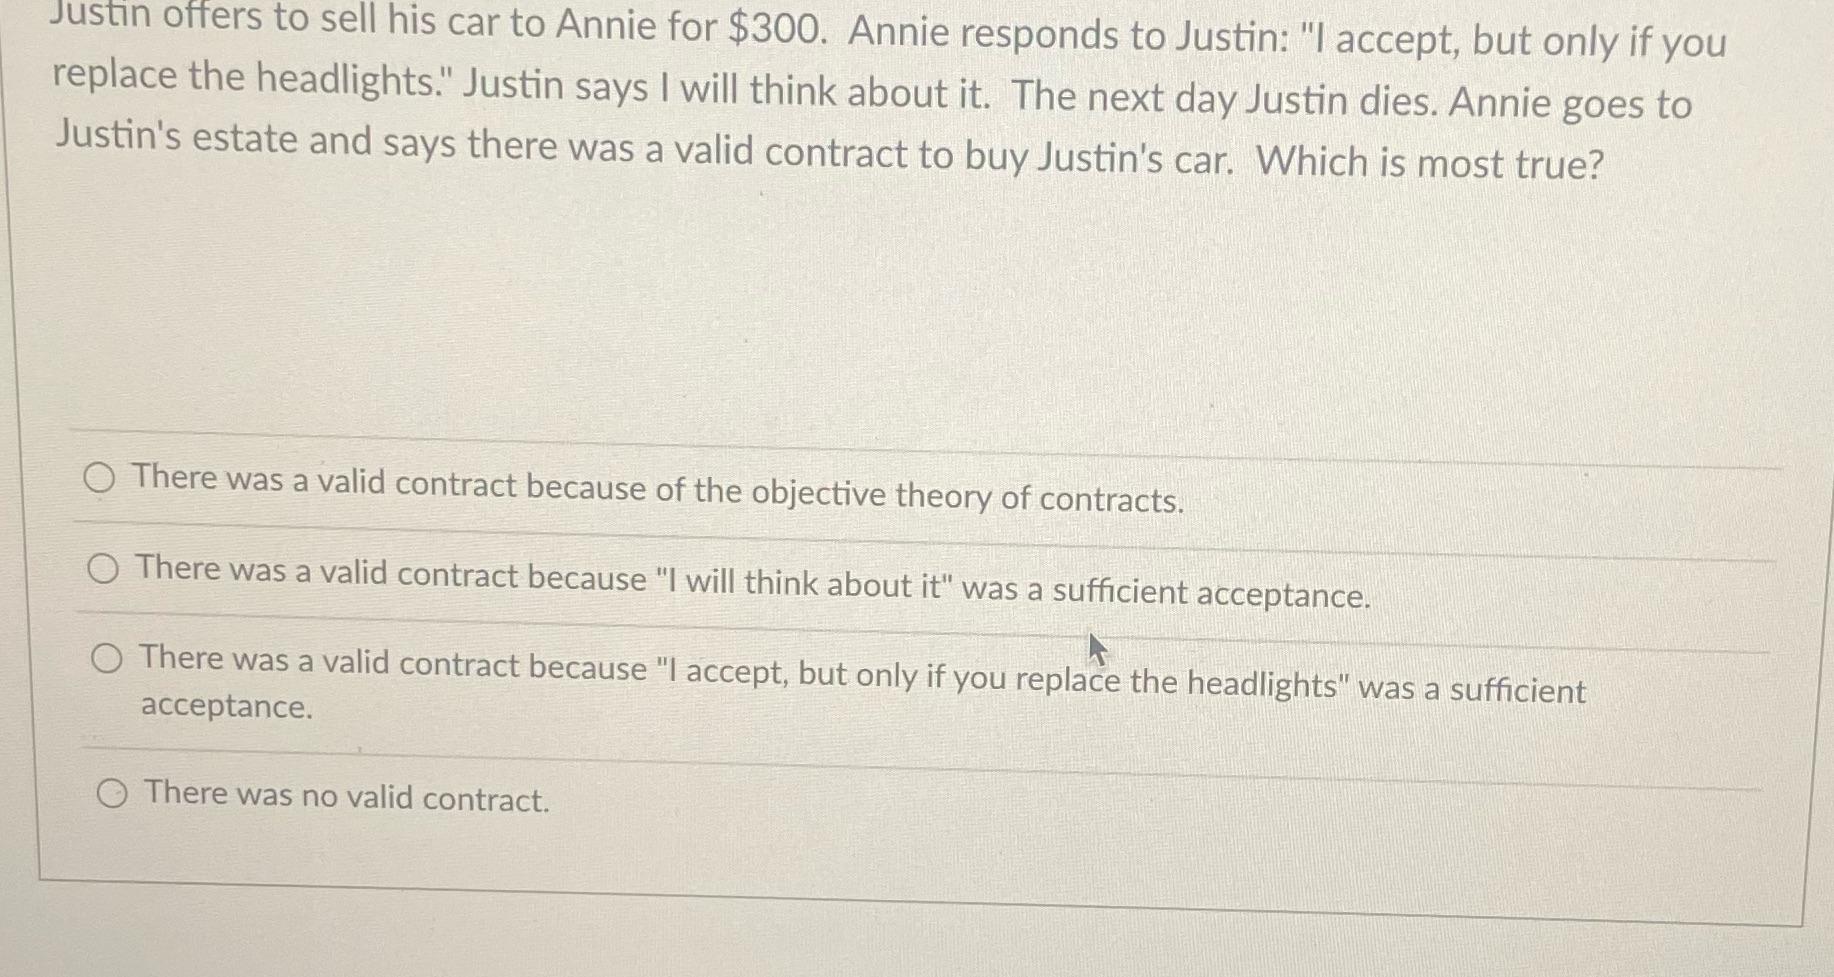 Justin offers to sell his car to Annie for $300. Annie responds to Justin: 